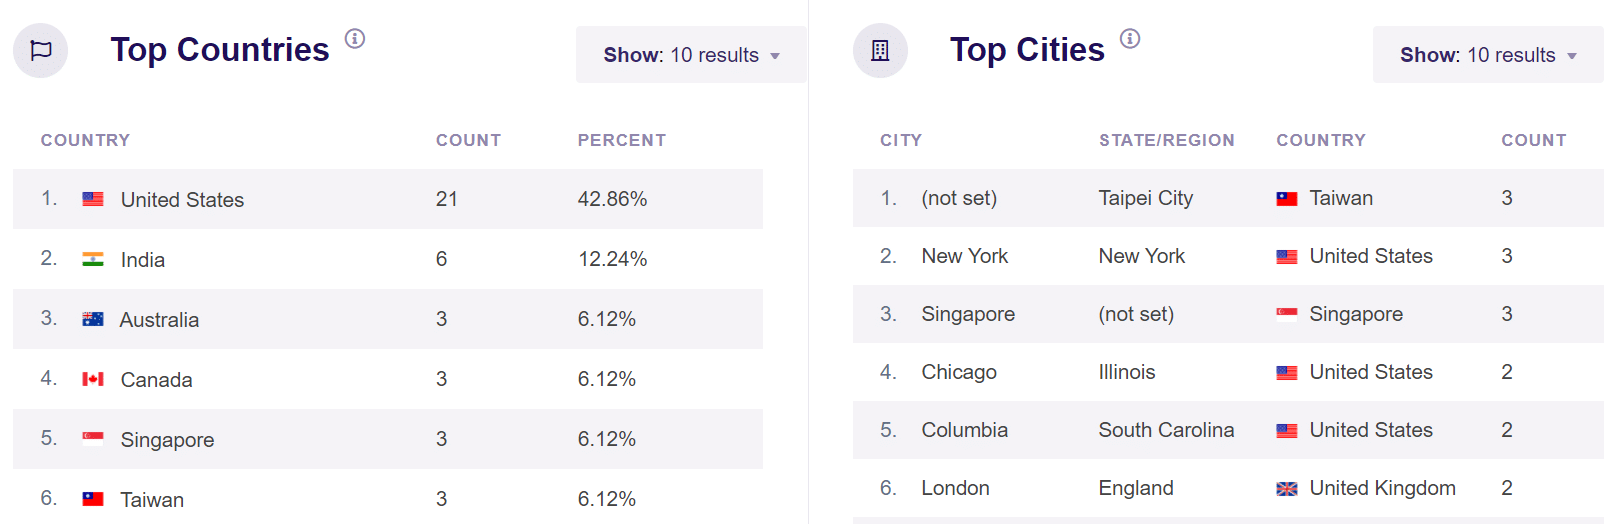 real time top countries and cities